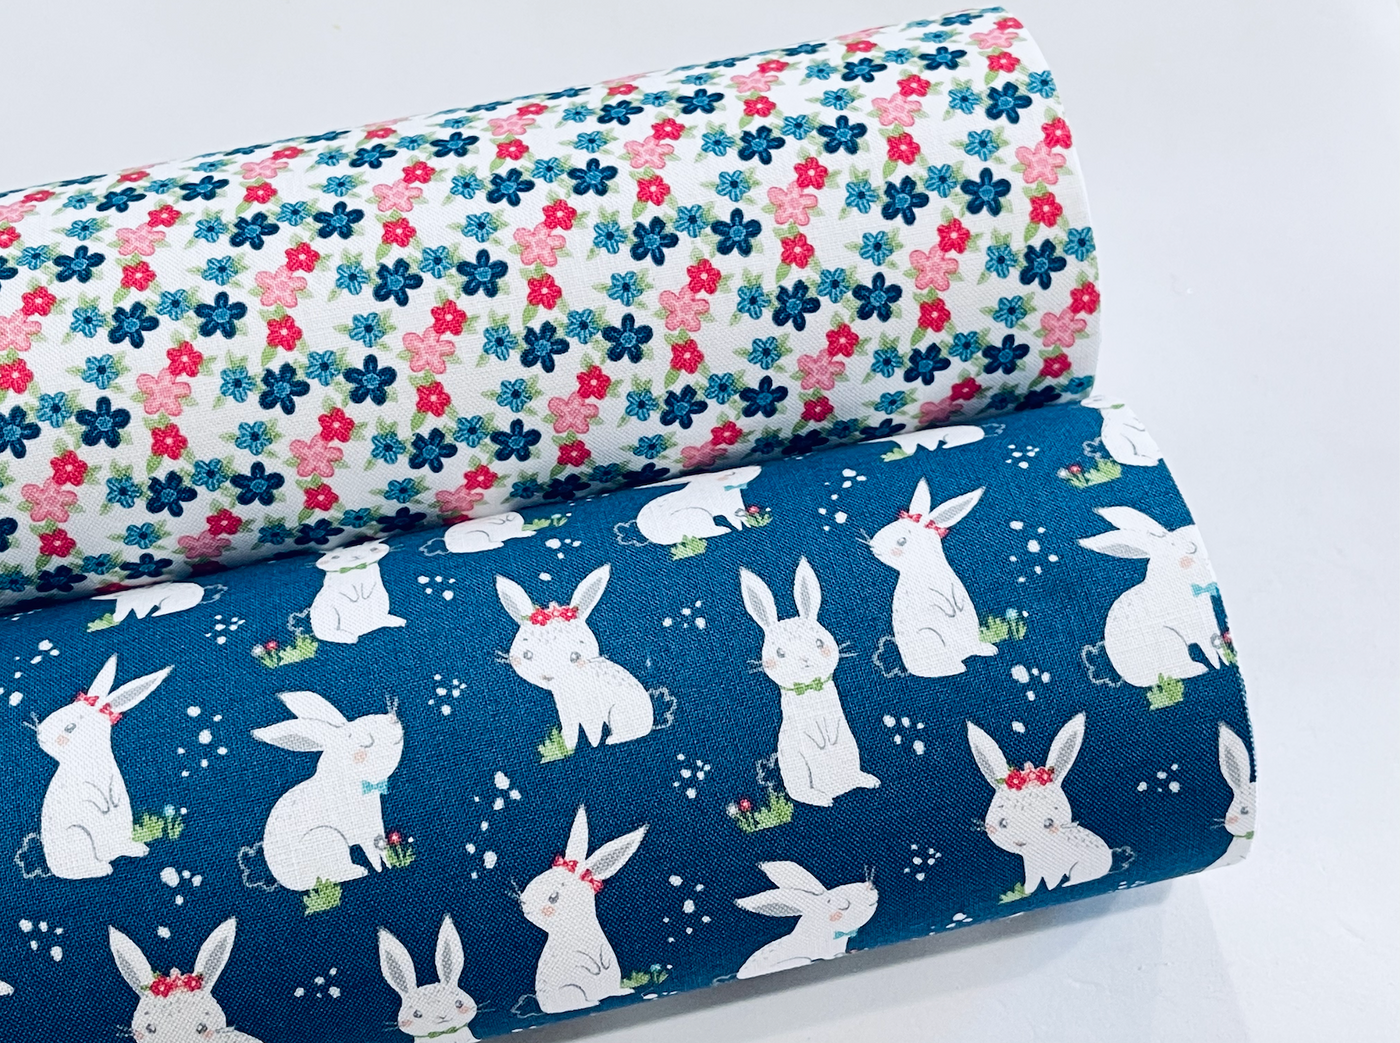 Winifred Rose Fabric Felt - Navy Bunny and Coordinating Petite Floral - Limited Stock